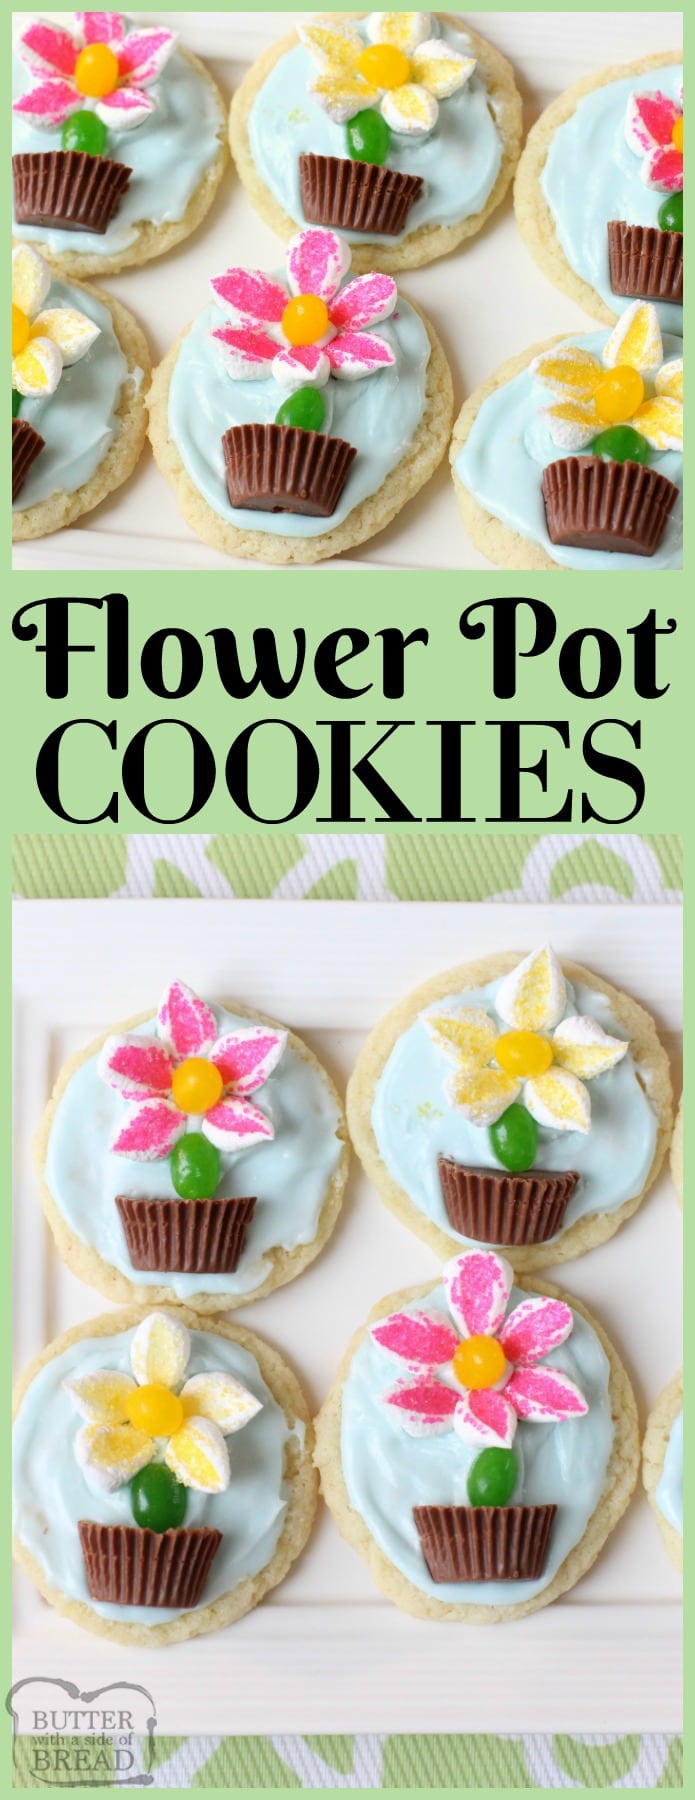 Flower Pot Cookies are easy to make and perfect for Spring baking! Everyone loves these cute treats with candy flowers in a chocolate pot on top!  Cute, colorful Spring flower cookie recipe from Butter With A Side of Bread